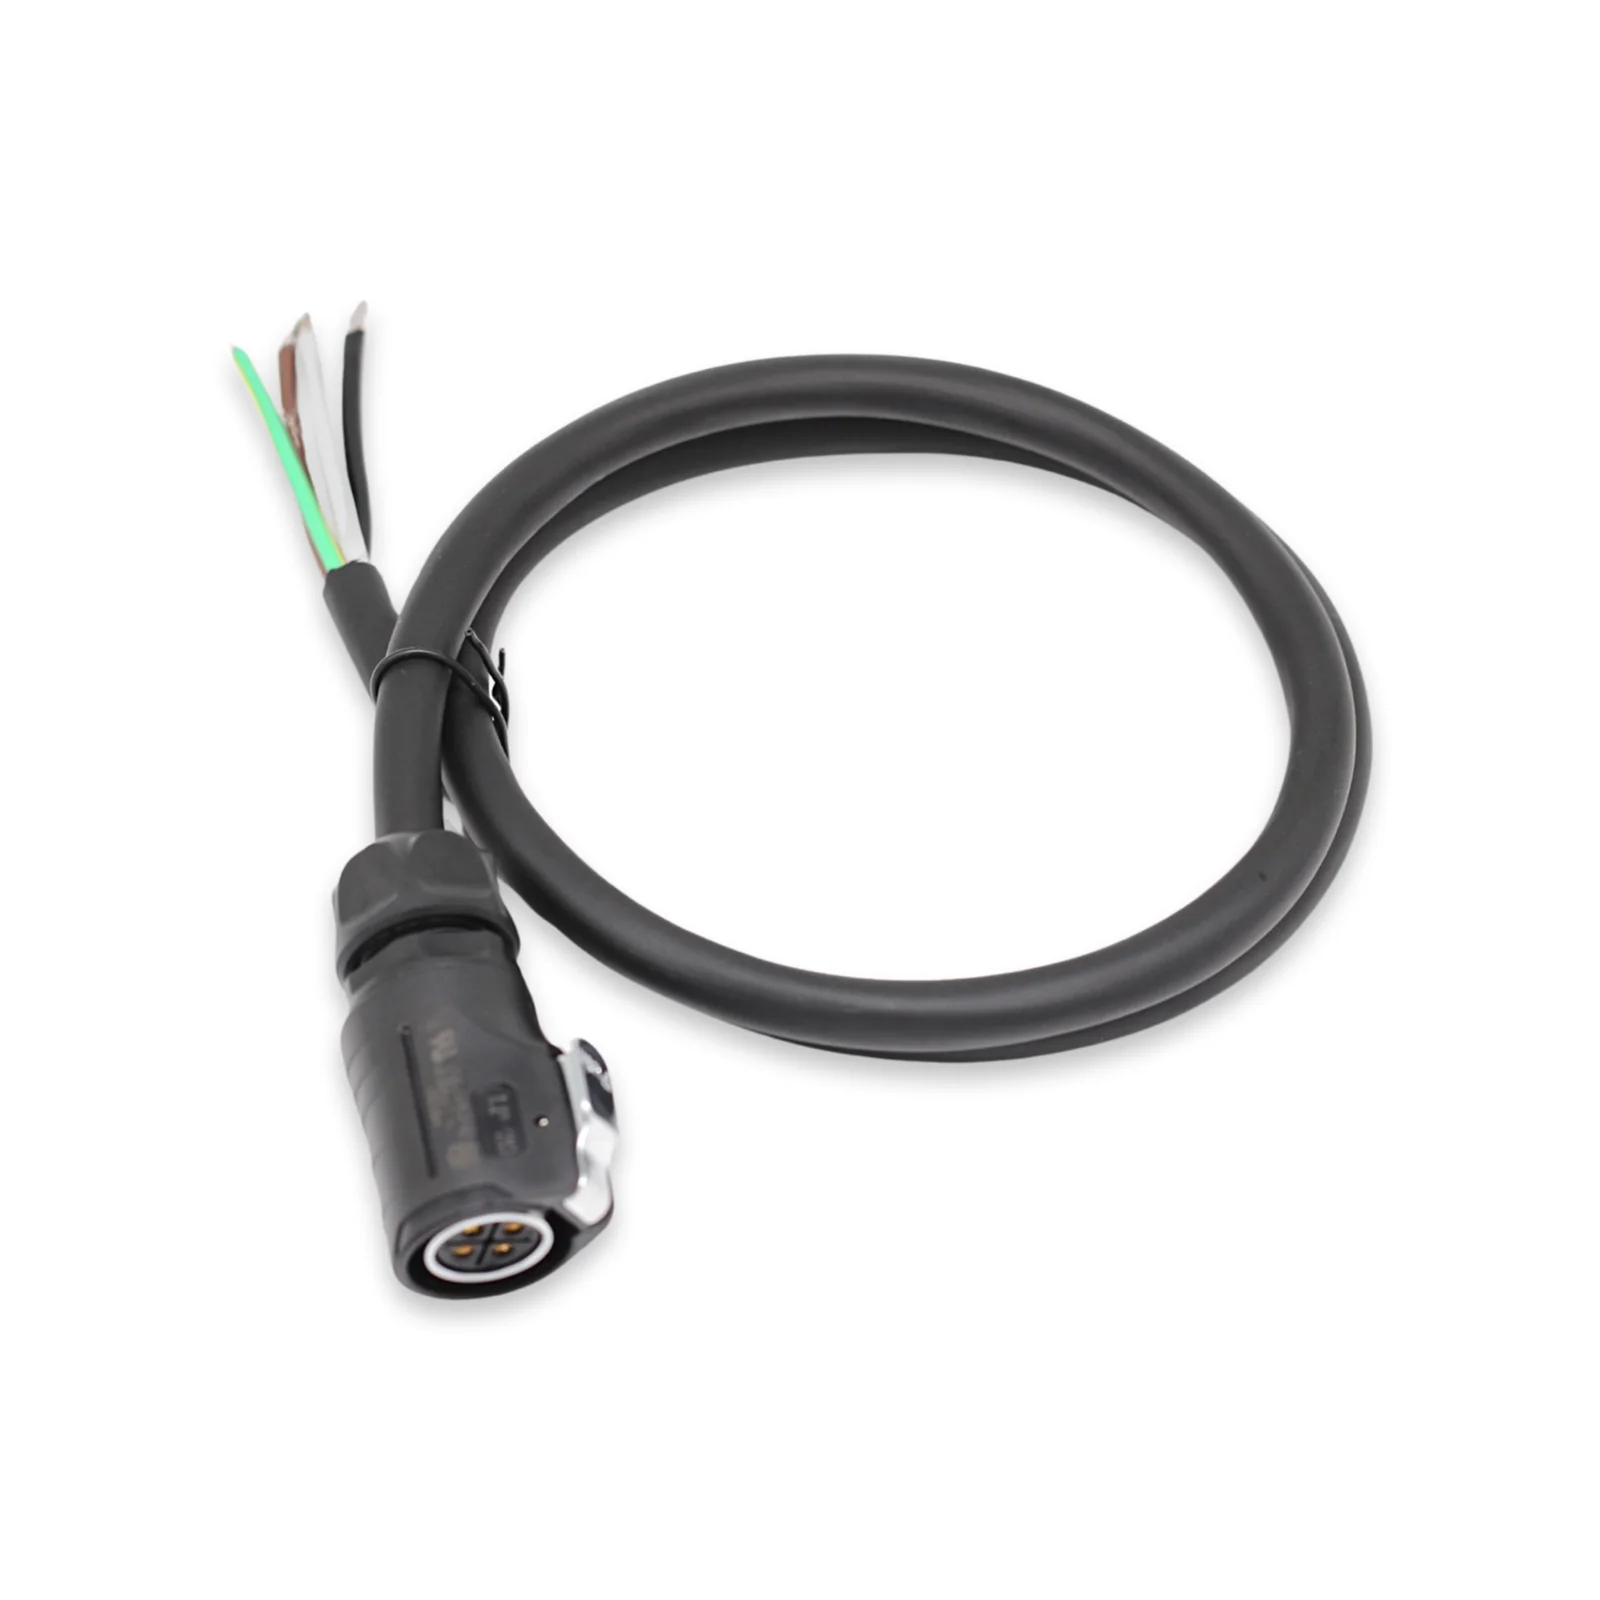 Hydro Water Cooling PSU Cable Secure and Efficient Power Supply Cord